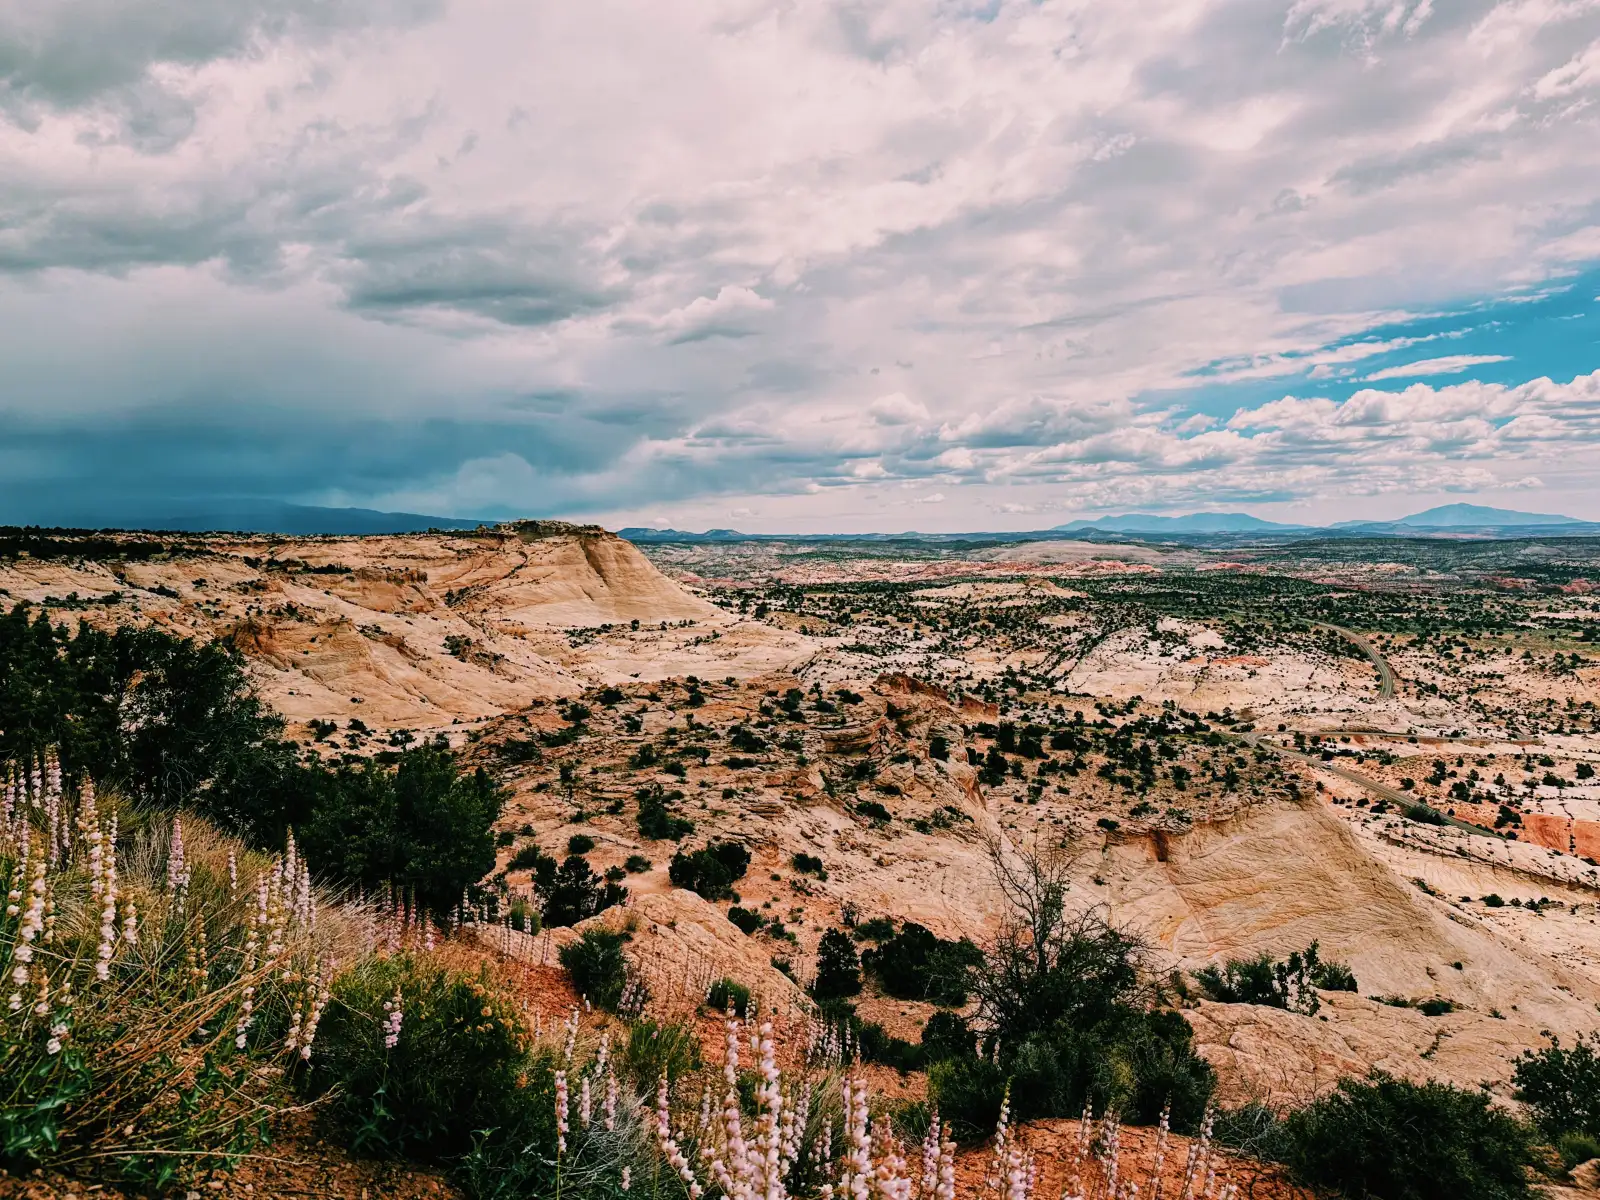 View of the San Rafael Swell in central Utah with many colors of rocks as a thunderstorm moves off in the distance